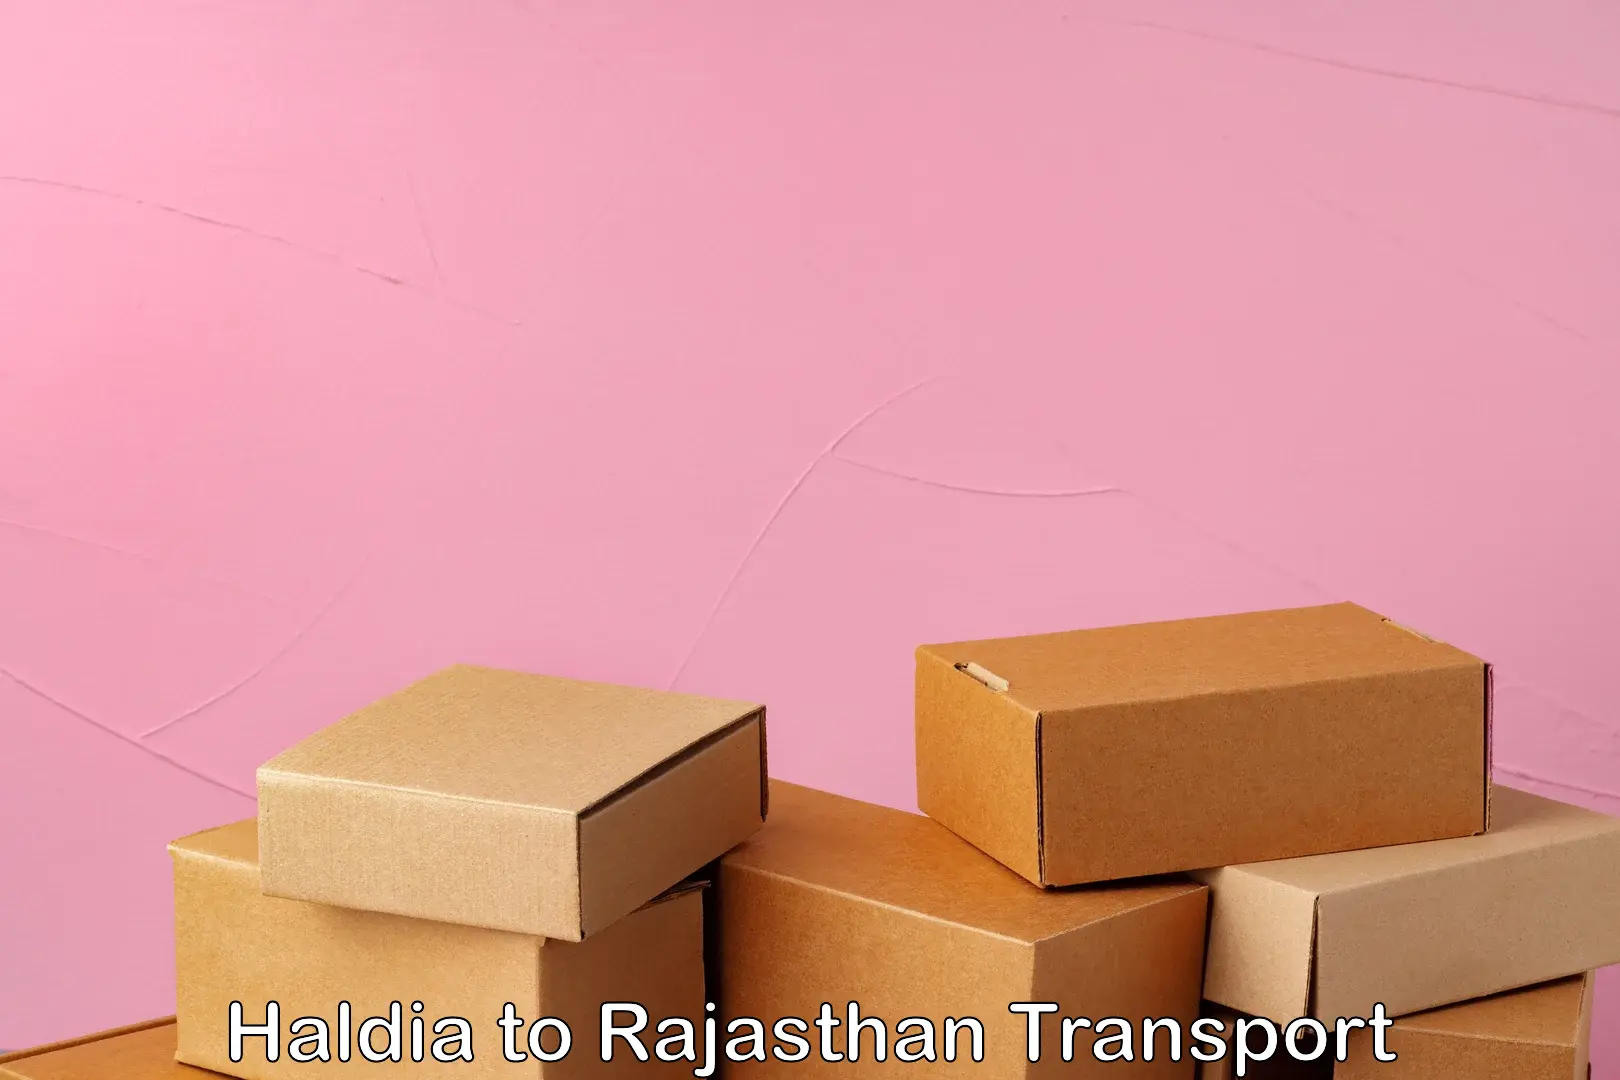 Commercial transport service Haldia to Rajasthan